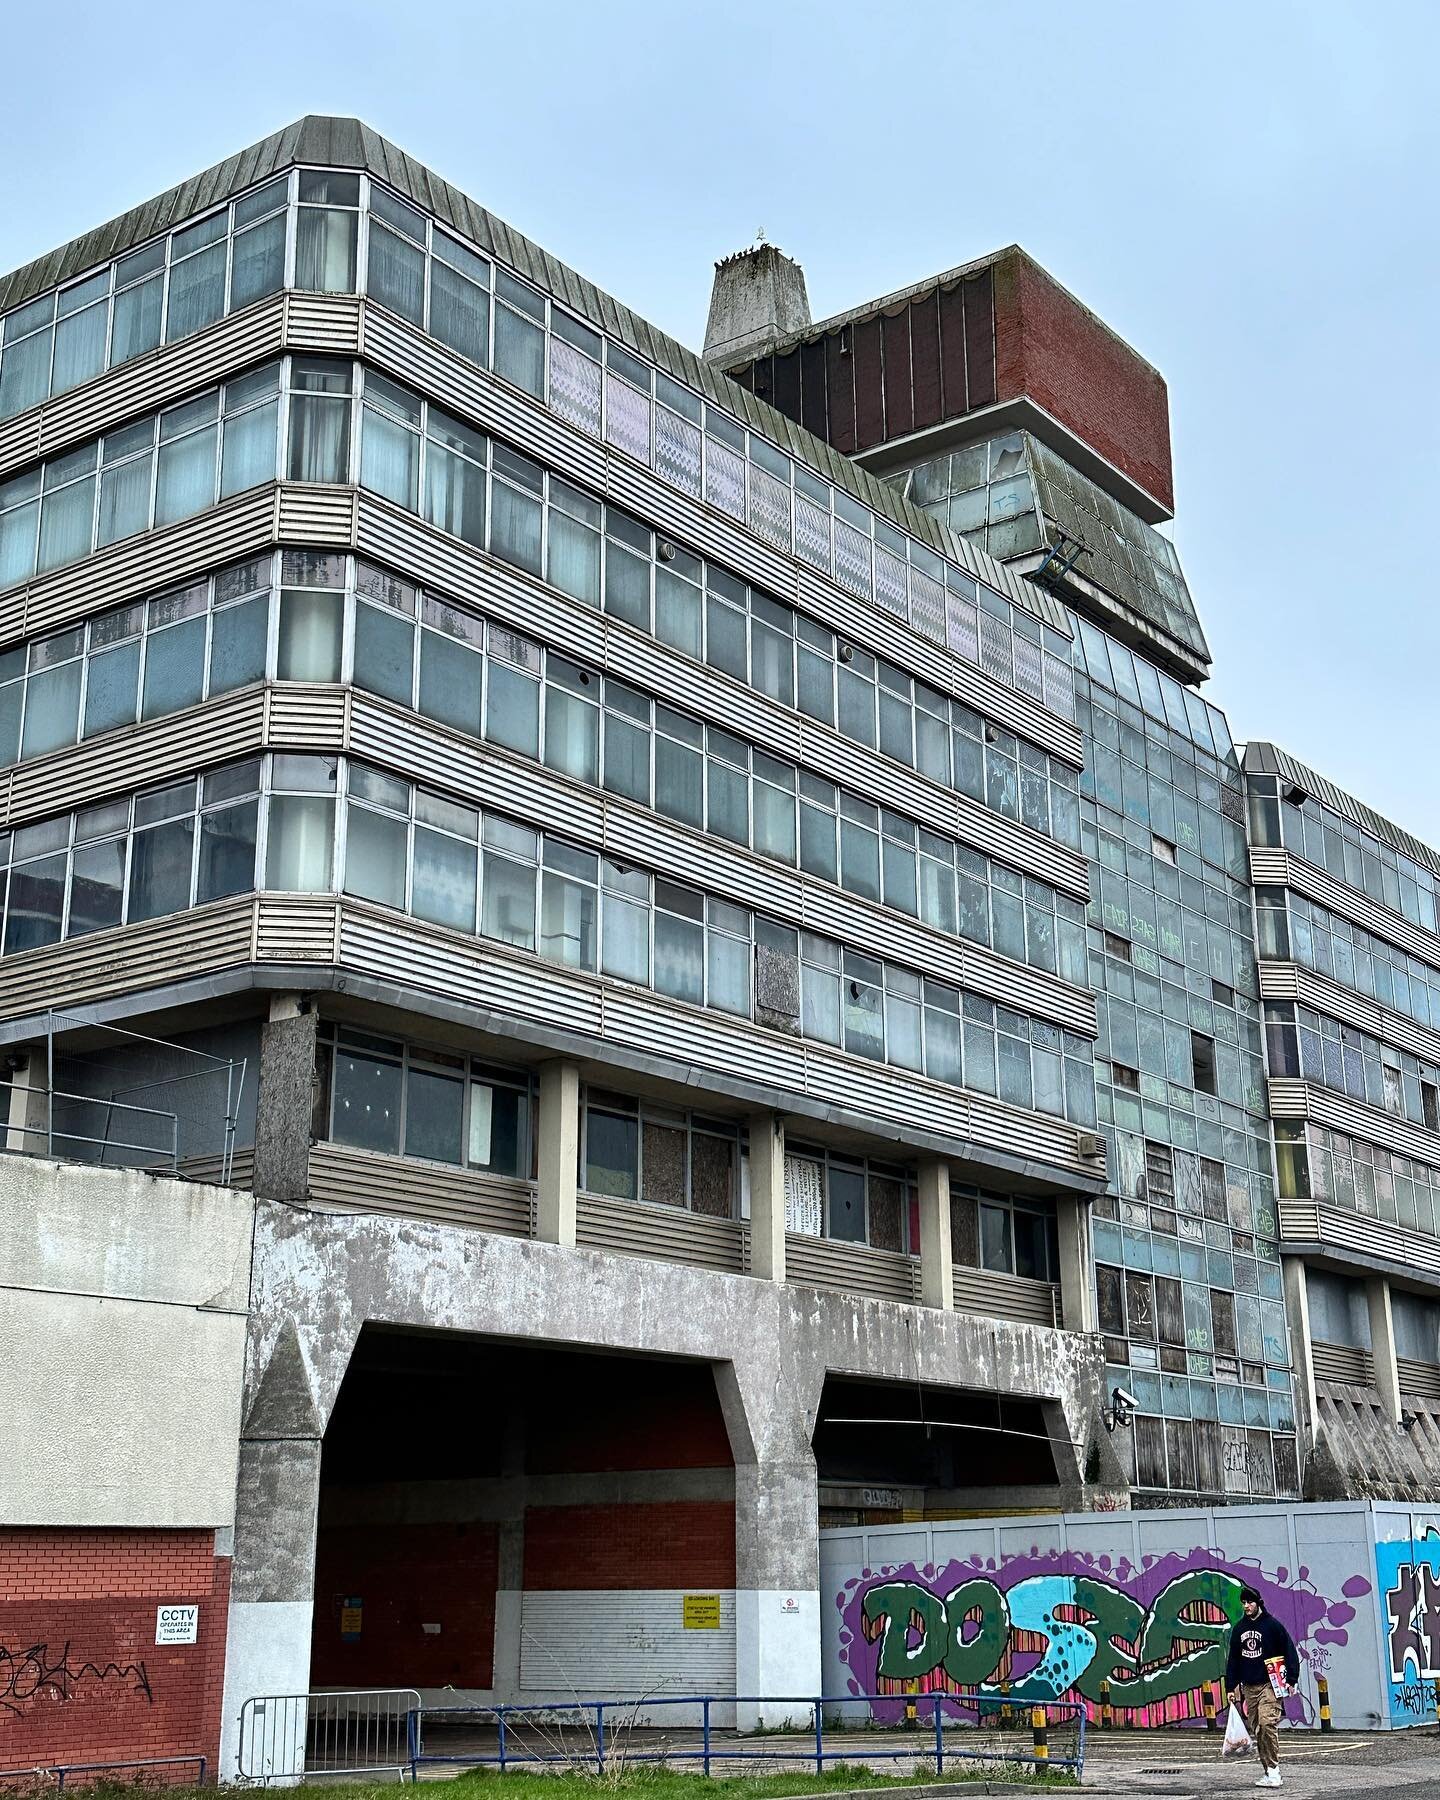 Ran into the man who installed windows in the Stationery House at Anglia Square in Norwich. Fantastic mod building, all glass and concrete with an attached theatre/movie house. The thing constantly leaked when it rained and has now been abandoned for